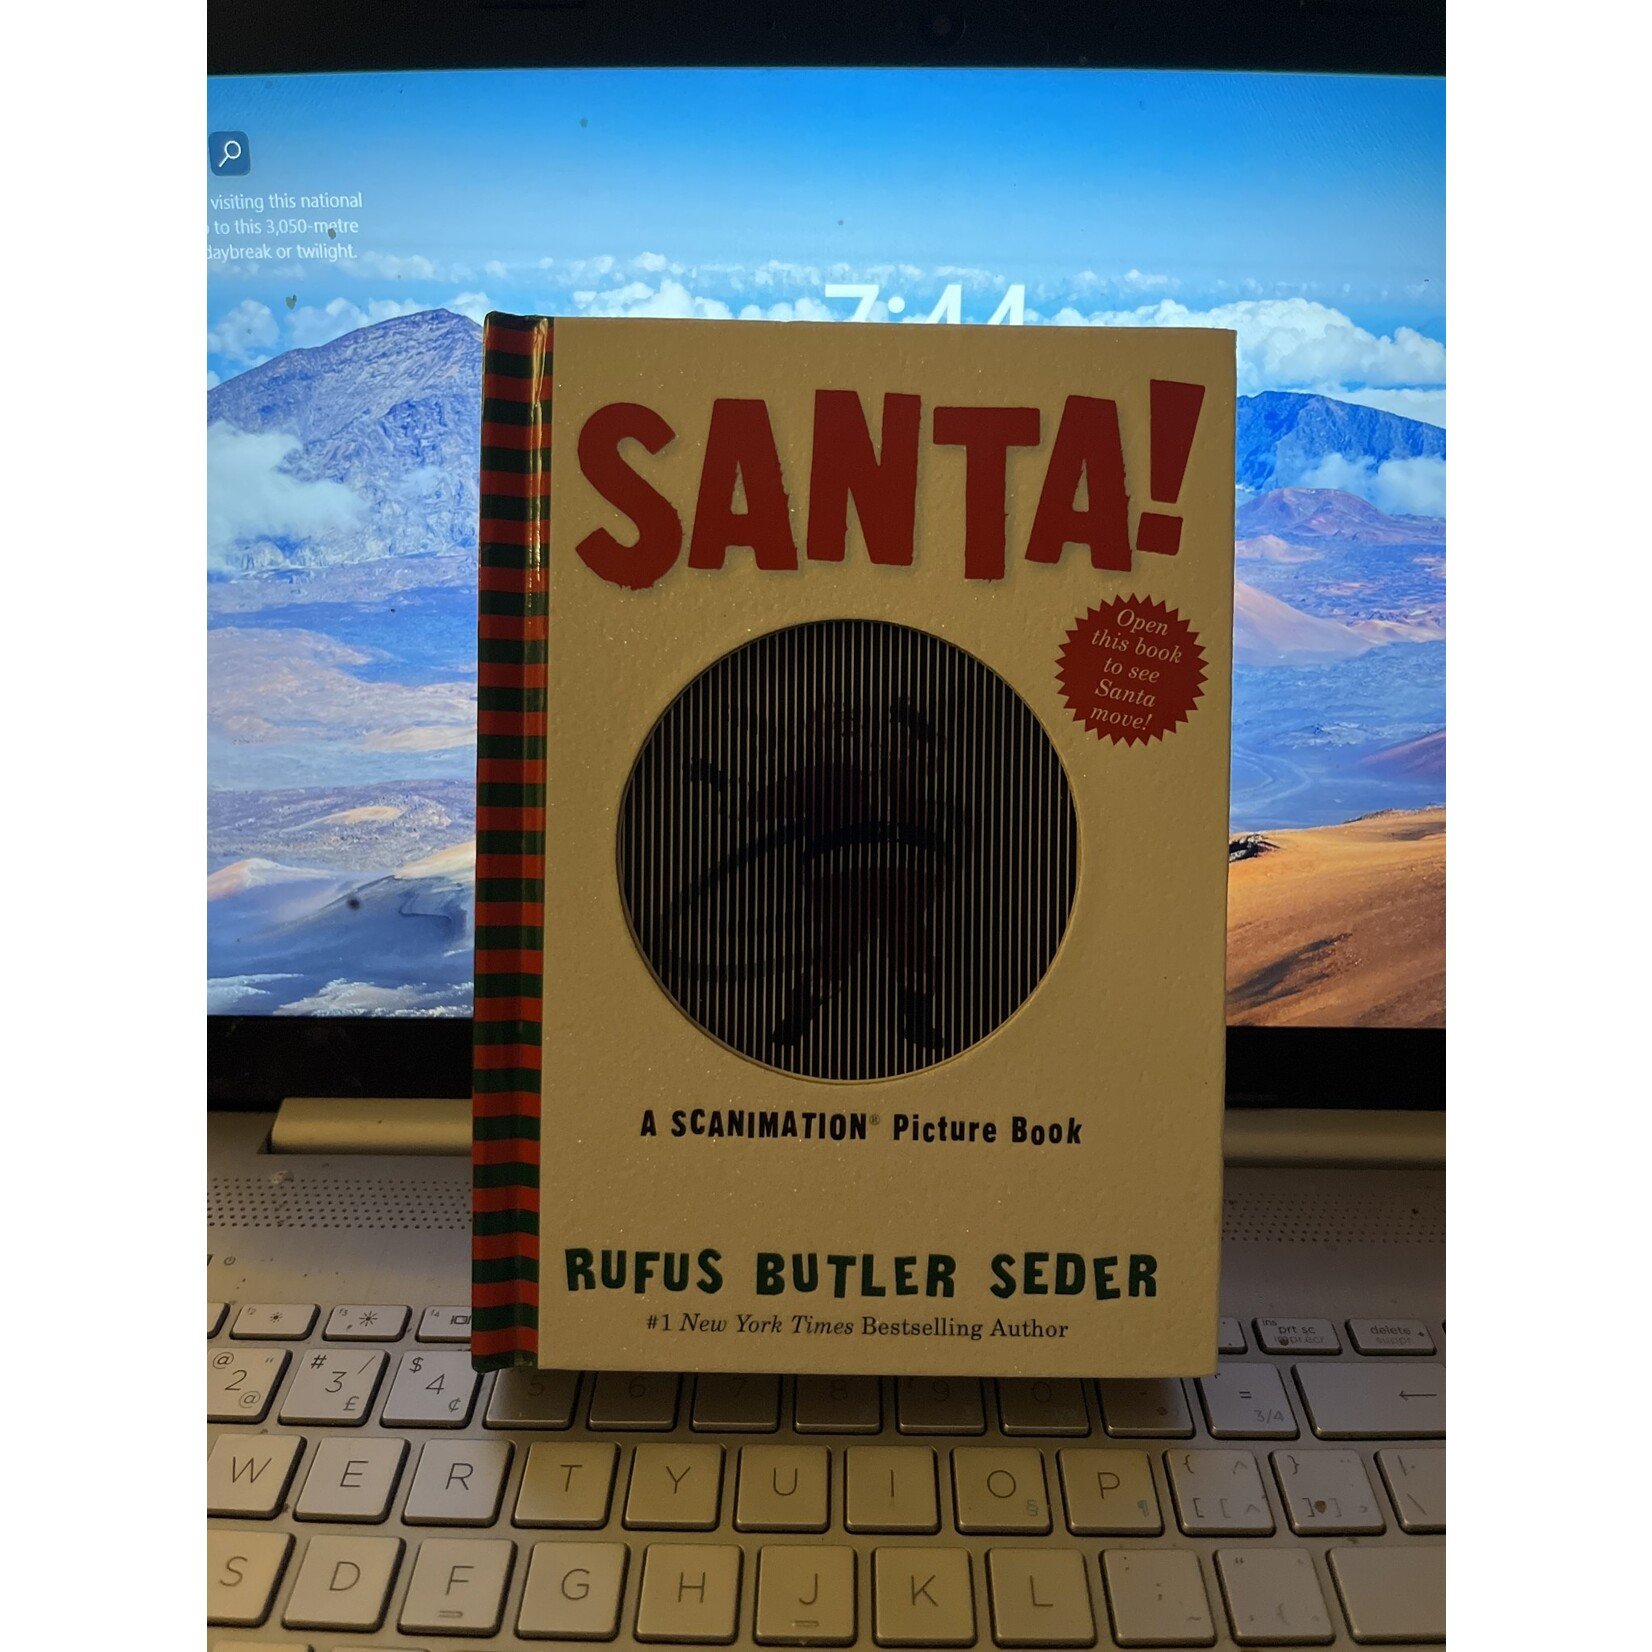 Santa! A Scanimation Picture Book